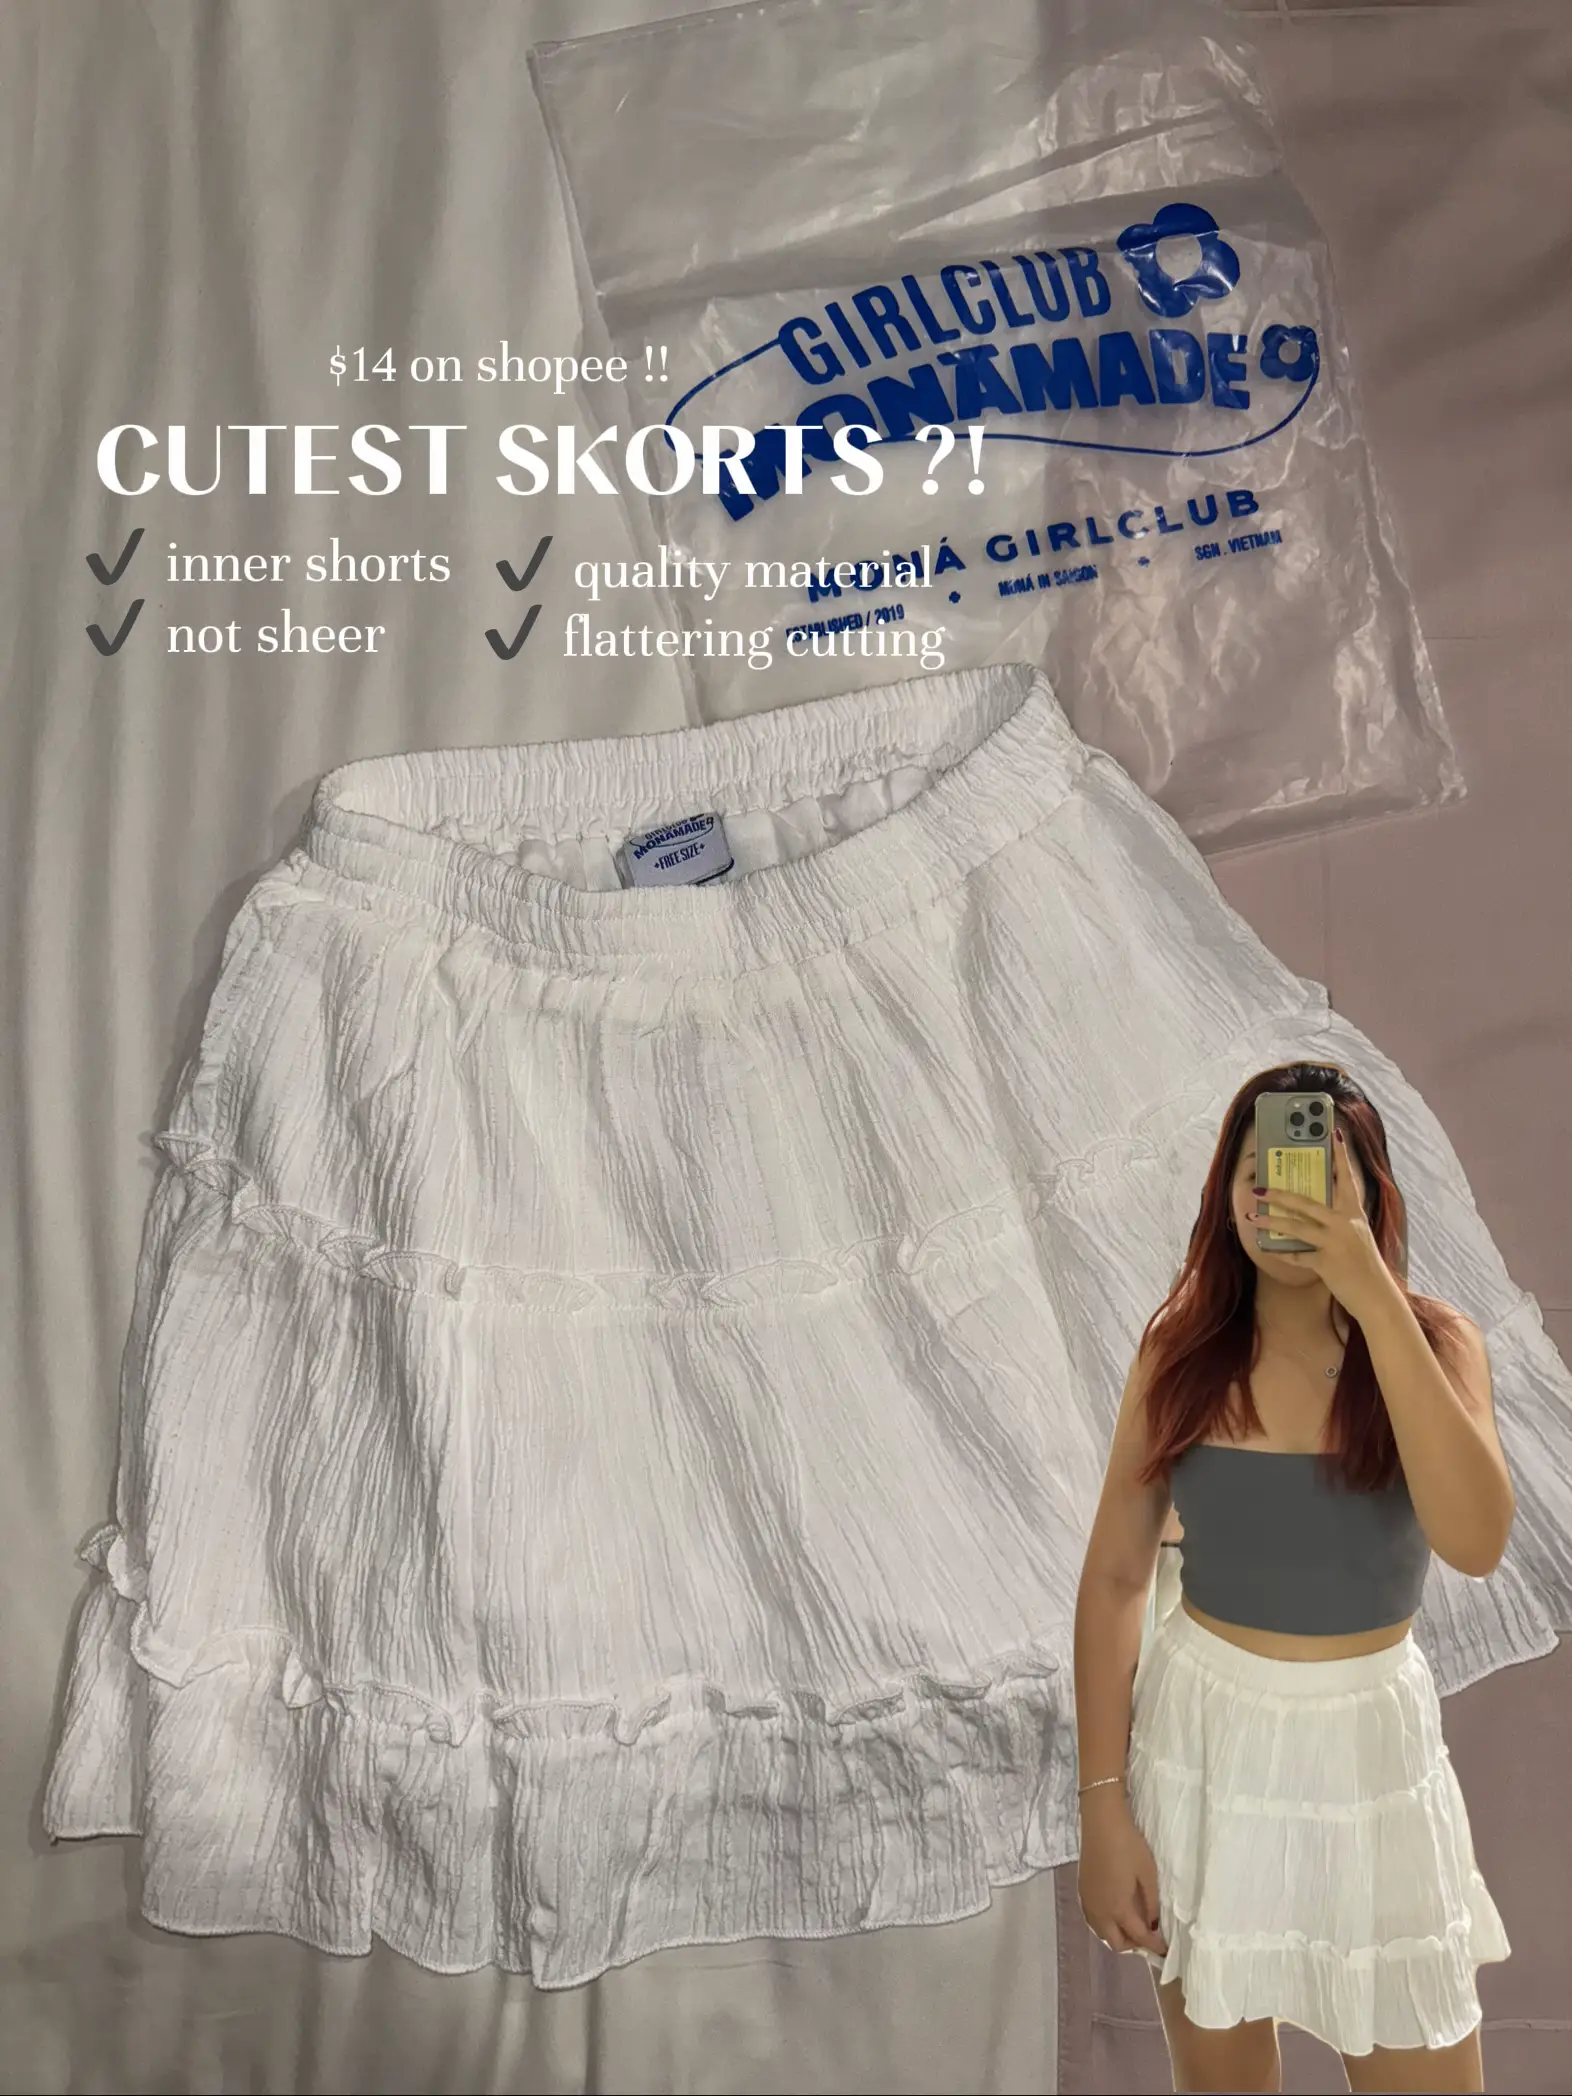 Hello! I've been trying to find a corset ruffle/lace skirt like